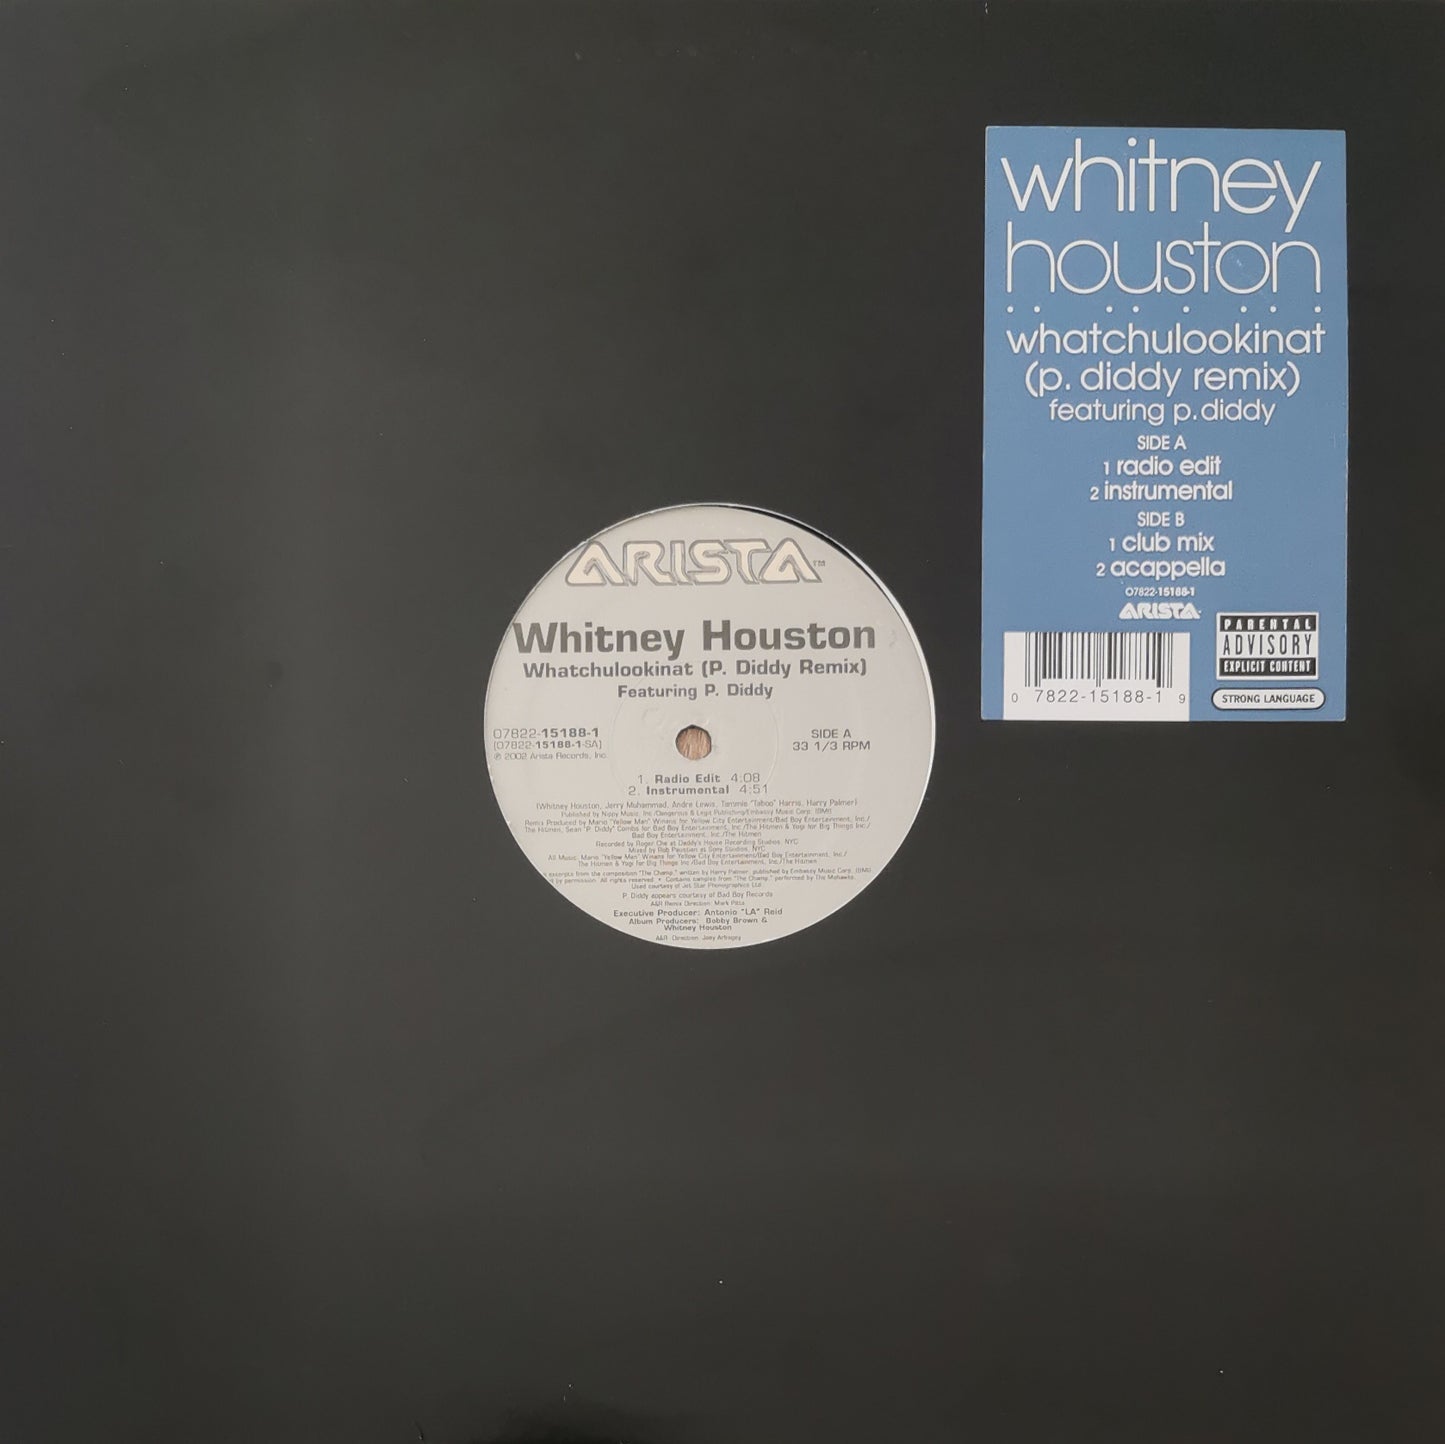 WHITNEY HOUSTON feat. P. DIDDY - Whatchulookinat (P. Diddy Remix)